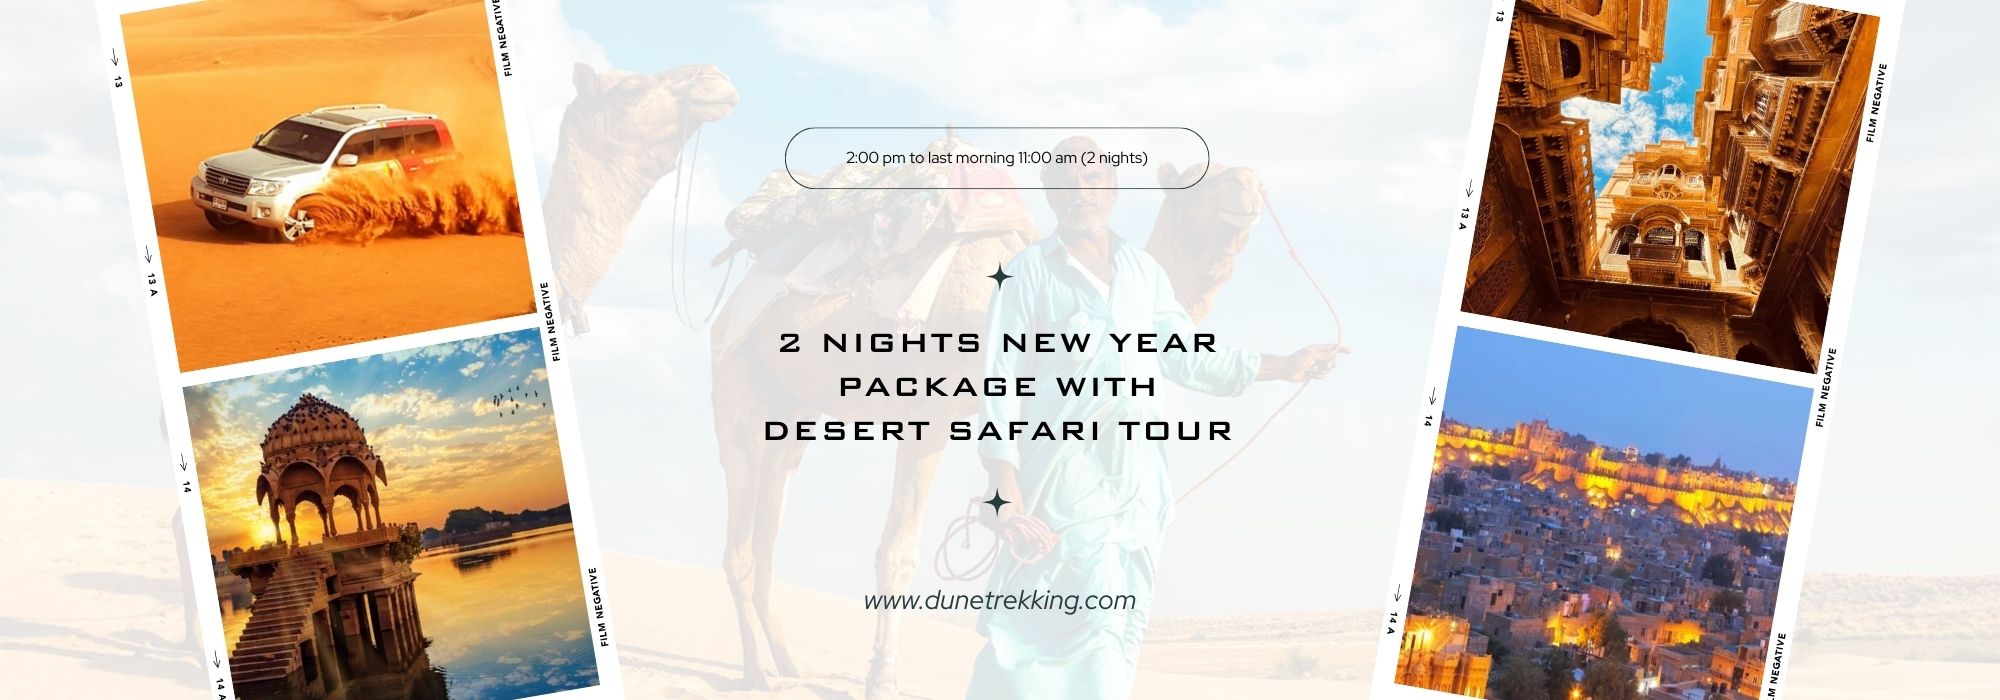 2 Nights New Year Package With Desert Safari Tour